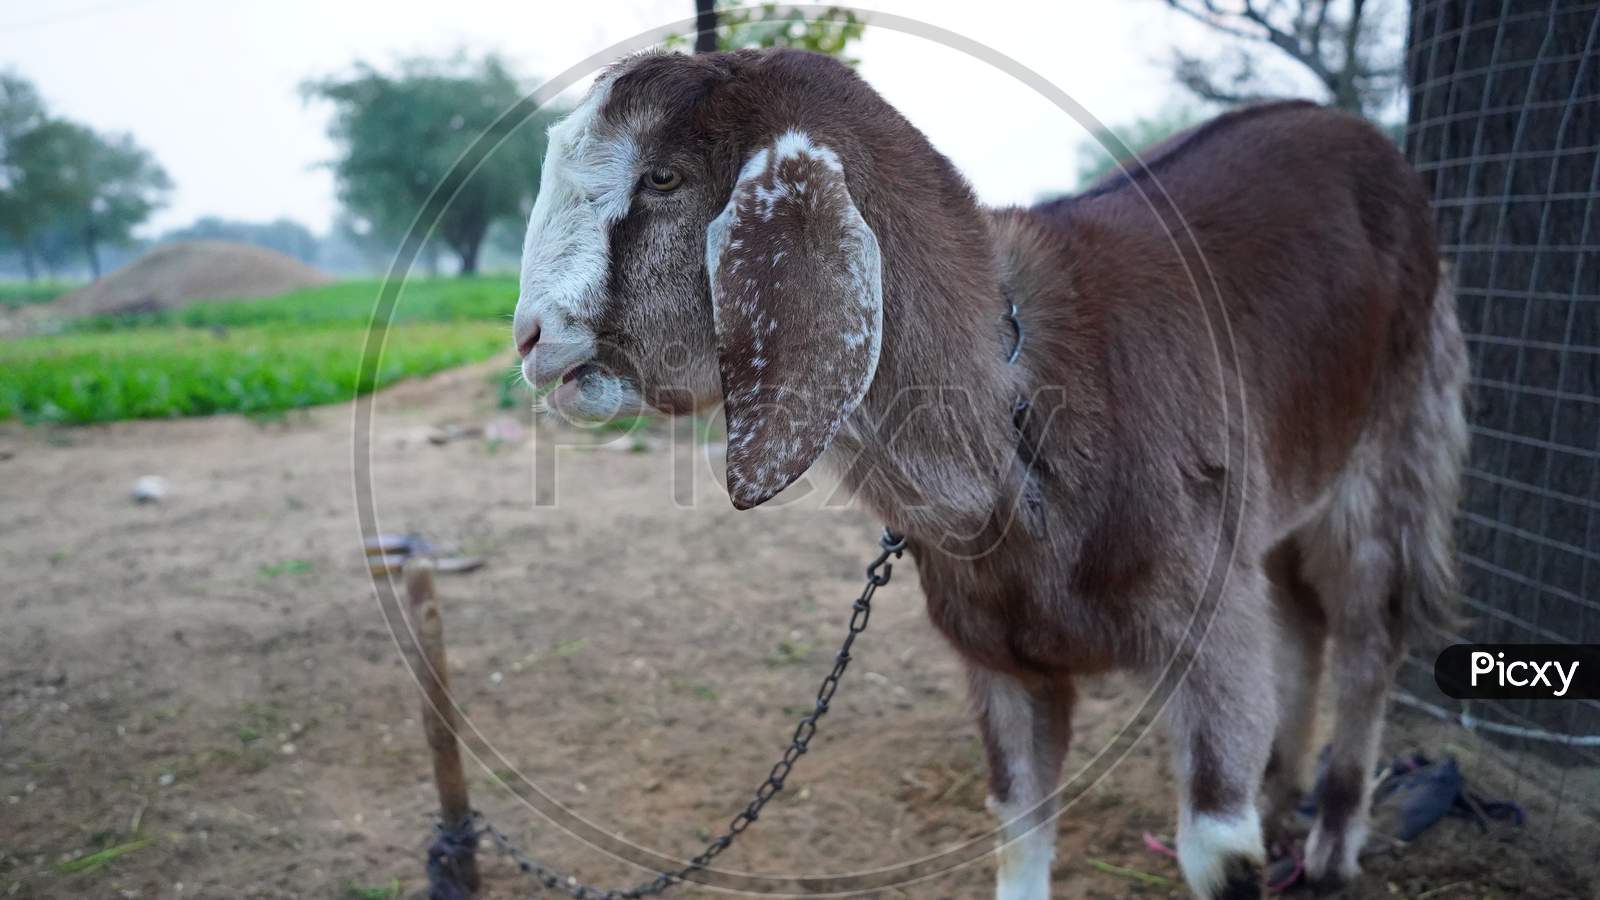 Innocent Beetal Species Goat Shivering From Cold In Winter Season In Countryside Outdoors. Pets Animal Concept.